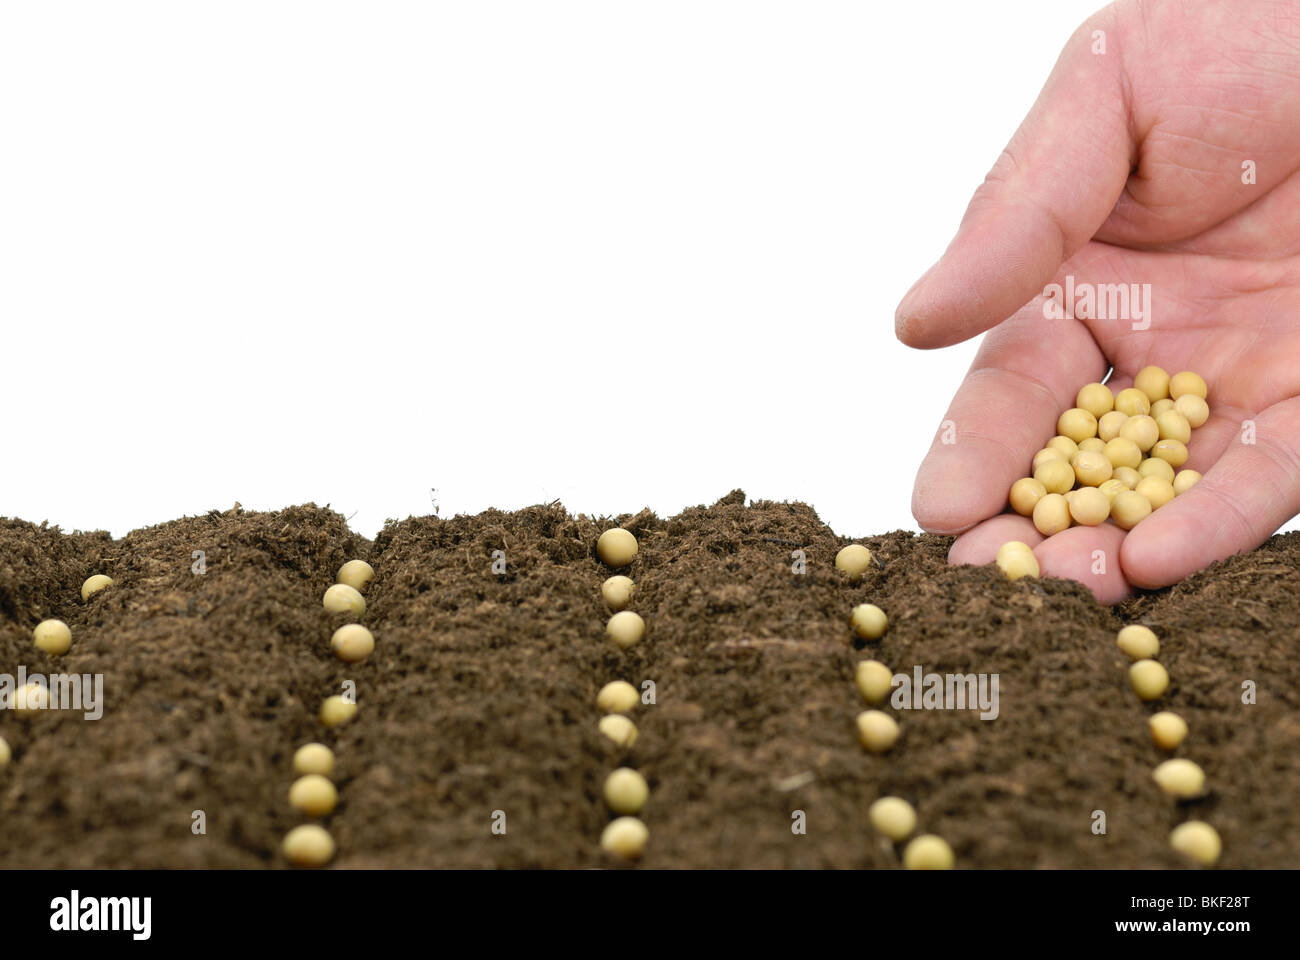 sowing soybean in a row,concept. Stock Photo